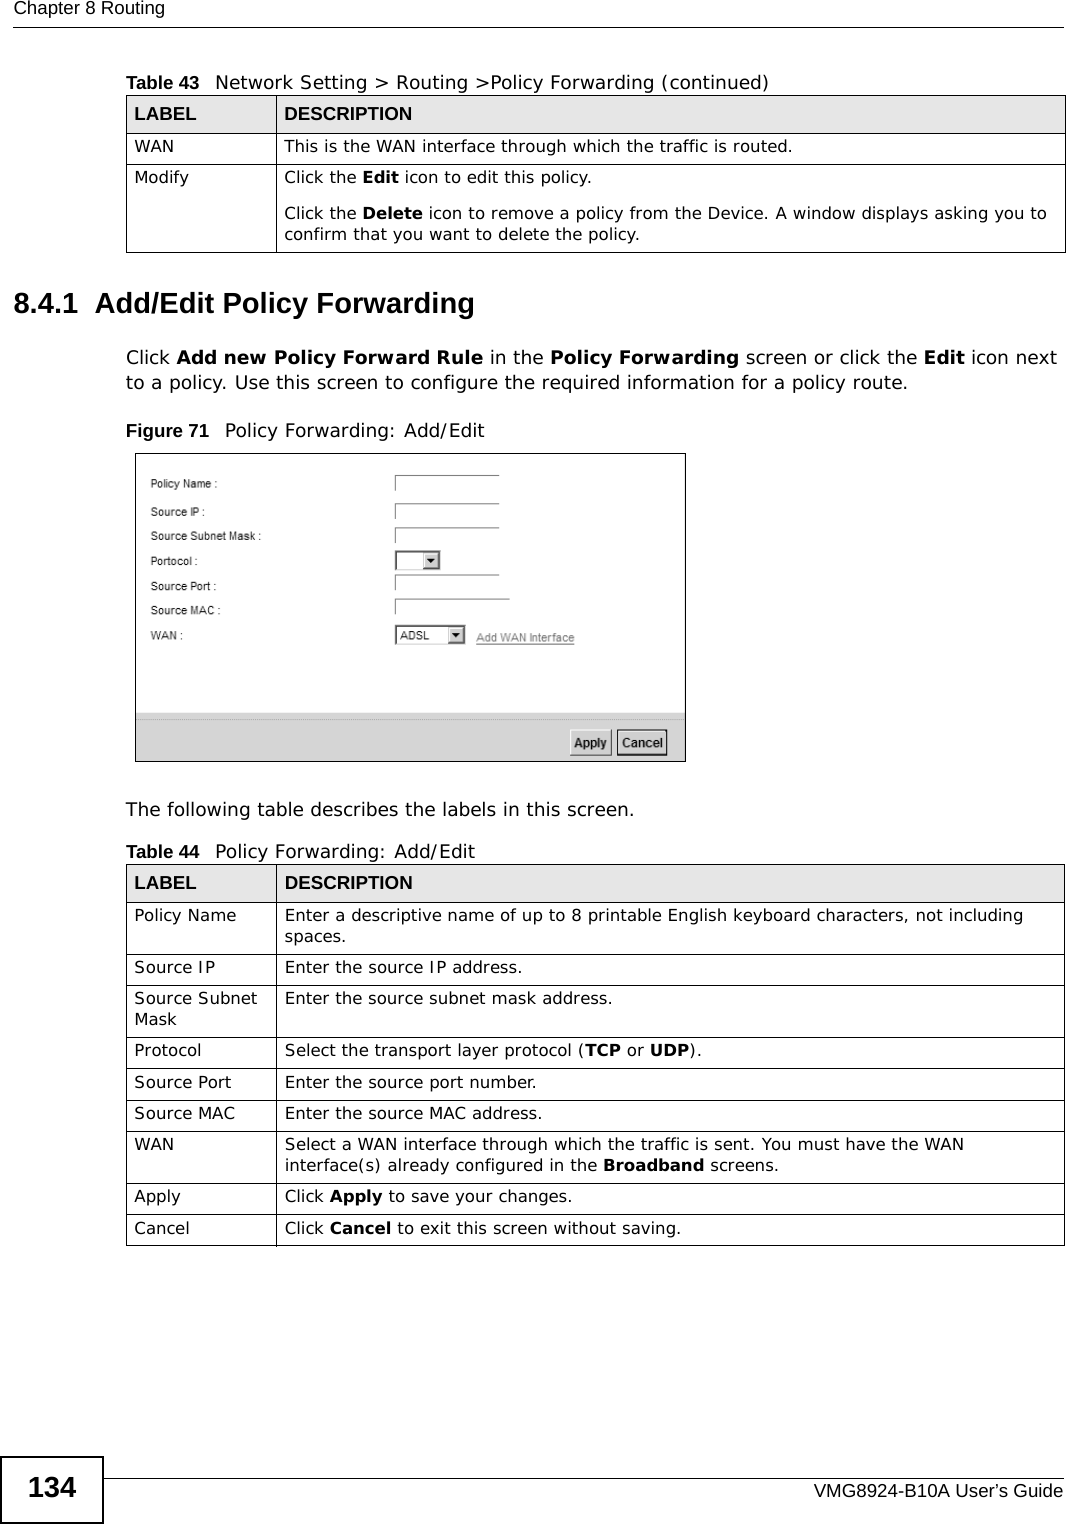 Chapter 8 RoutingVMG8924-B10A User’s Guide1348.4.1  Add/Edit Policy Forwarding Click Add new Policy Forward Rule in the Policy Forwarding screen or click the Edit icon next to a policy. Use this screen to configure the required information for a policy route.Figure 71   Policy Forwarding: Add/Edit The following table describes the labels in this screen. WAN This is the WAN interface through which the traffic is routed. Modify Click the Edit icon to edit this policy.Click the Delete icon to remove a policy from the Device. A window displays asking you to confirm that you want to delete the policy. Table 43   Network Setting &gt; Routing &gt;Policy Forwarding (continued)LABEL DESCRIPTIONTable 44   Policy Forwarding: Add/EditLABEL DESCRIPTIONPolicy Name Enter a descriptive name of up to 8 printable English keyboard characters, not including spaces.Source IP  Enter the source IP address.Source Subnet Mask Enter the source subnet mask address. Protocol Select the transport layer protocol (TCP or UDP). Source Port  Enter the source port number. Source MAC  Enter the source MAC address. WAN Select a WAN interface through which the traffic is sent. You must have the WAN interface(s) already configured in the Broadband screens. Apply Click Apply to save your changes.Cancel Click Cancel to exit this screen without saving.